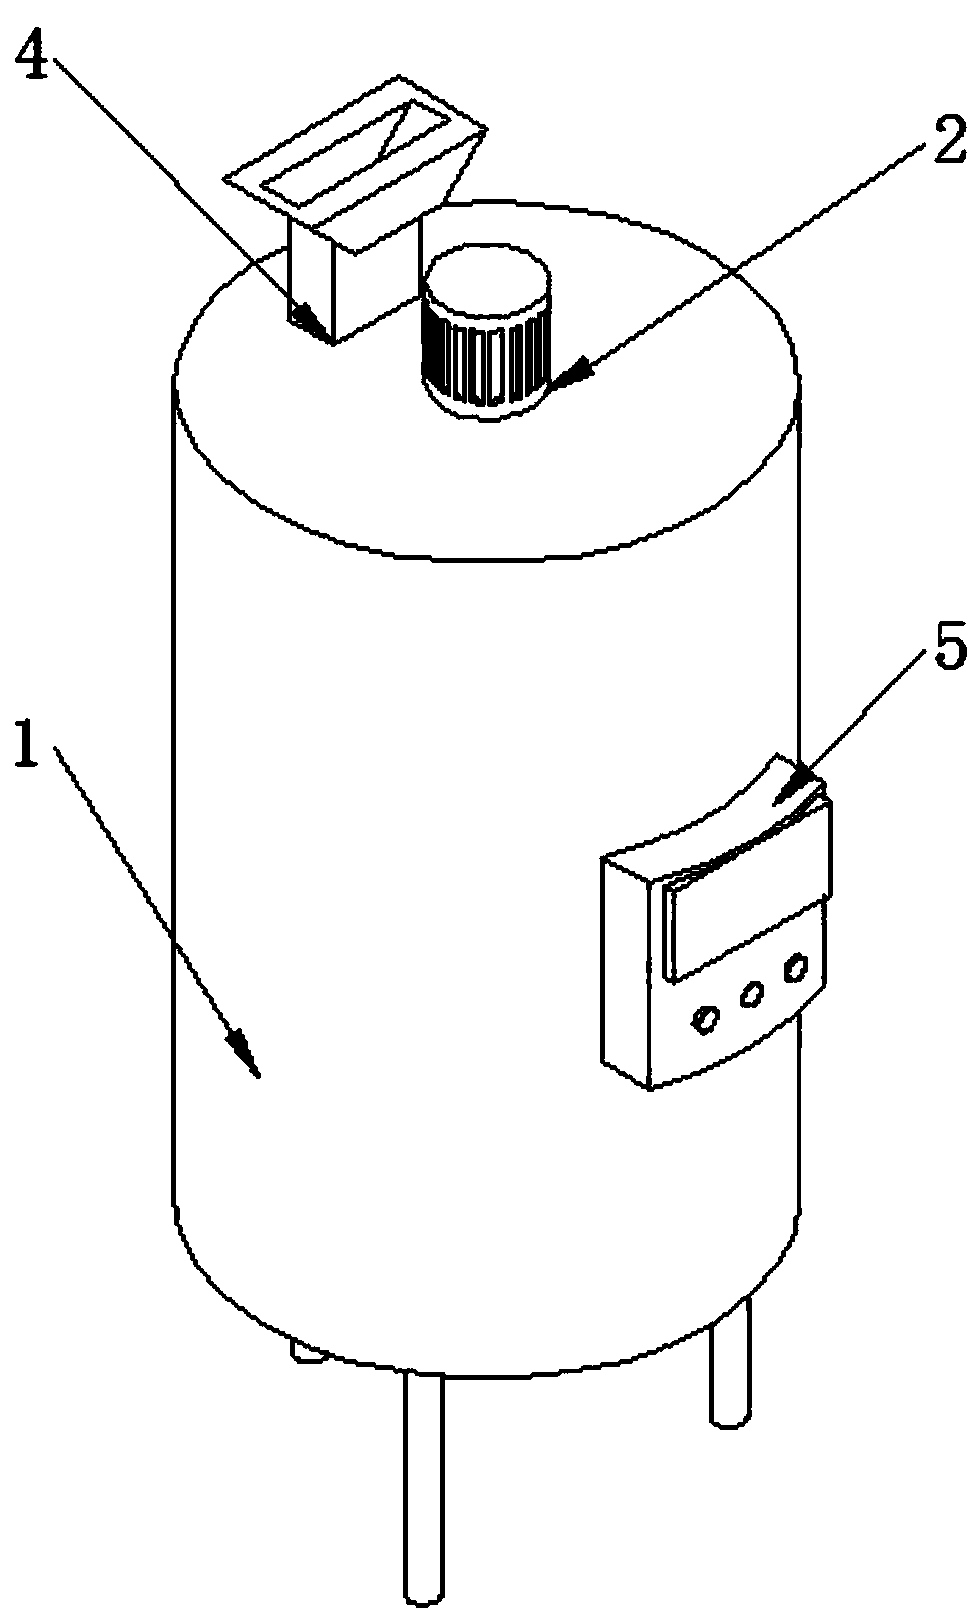 Operating method of activation container stirring tank for coal mines